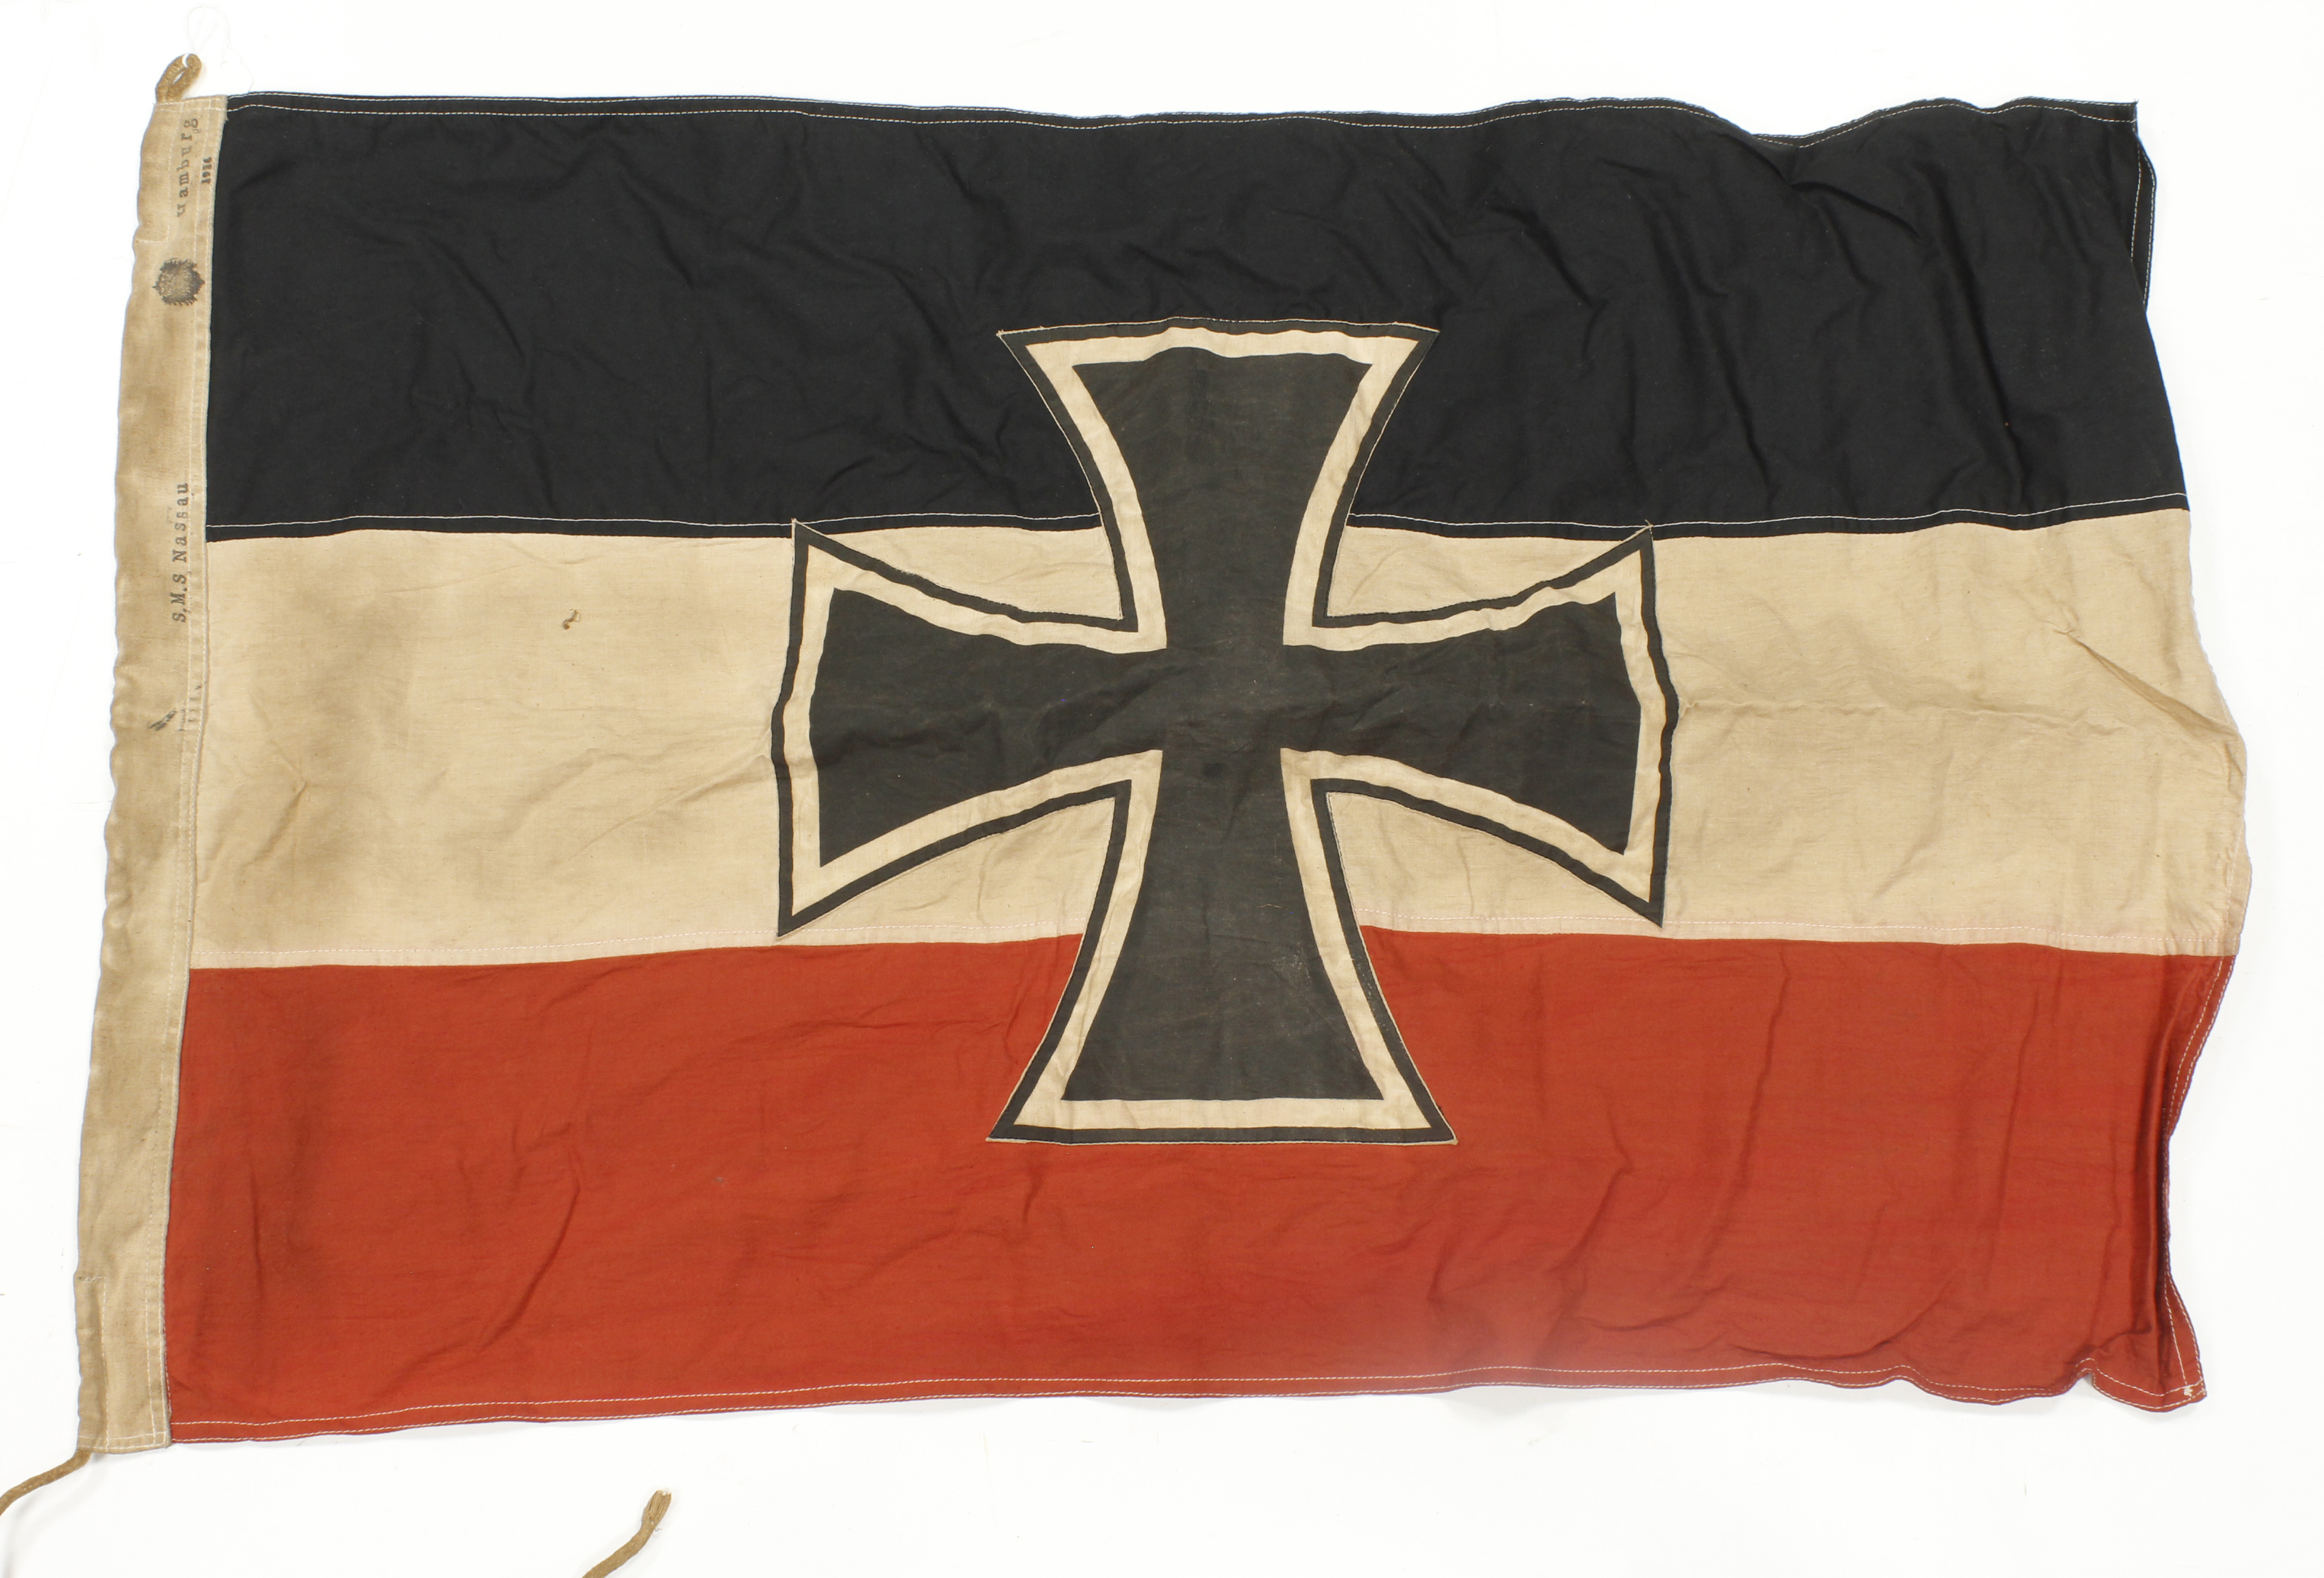 Imperial German Naval flag, 3x feet long, issue stamped, service wear.